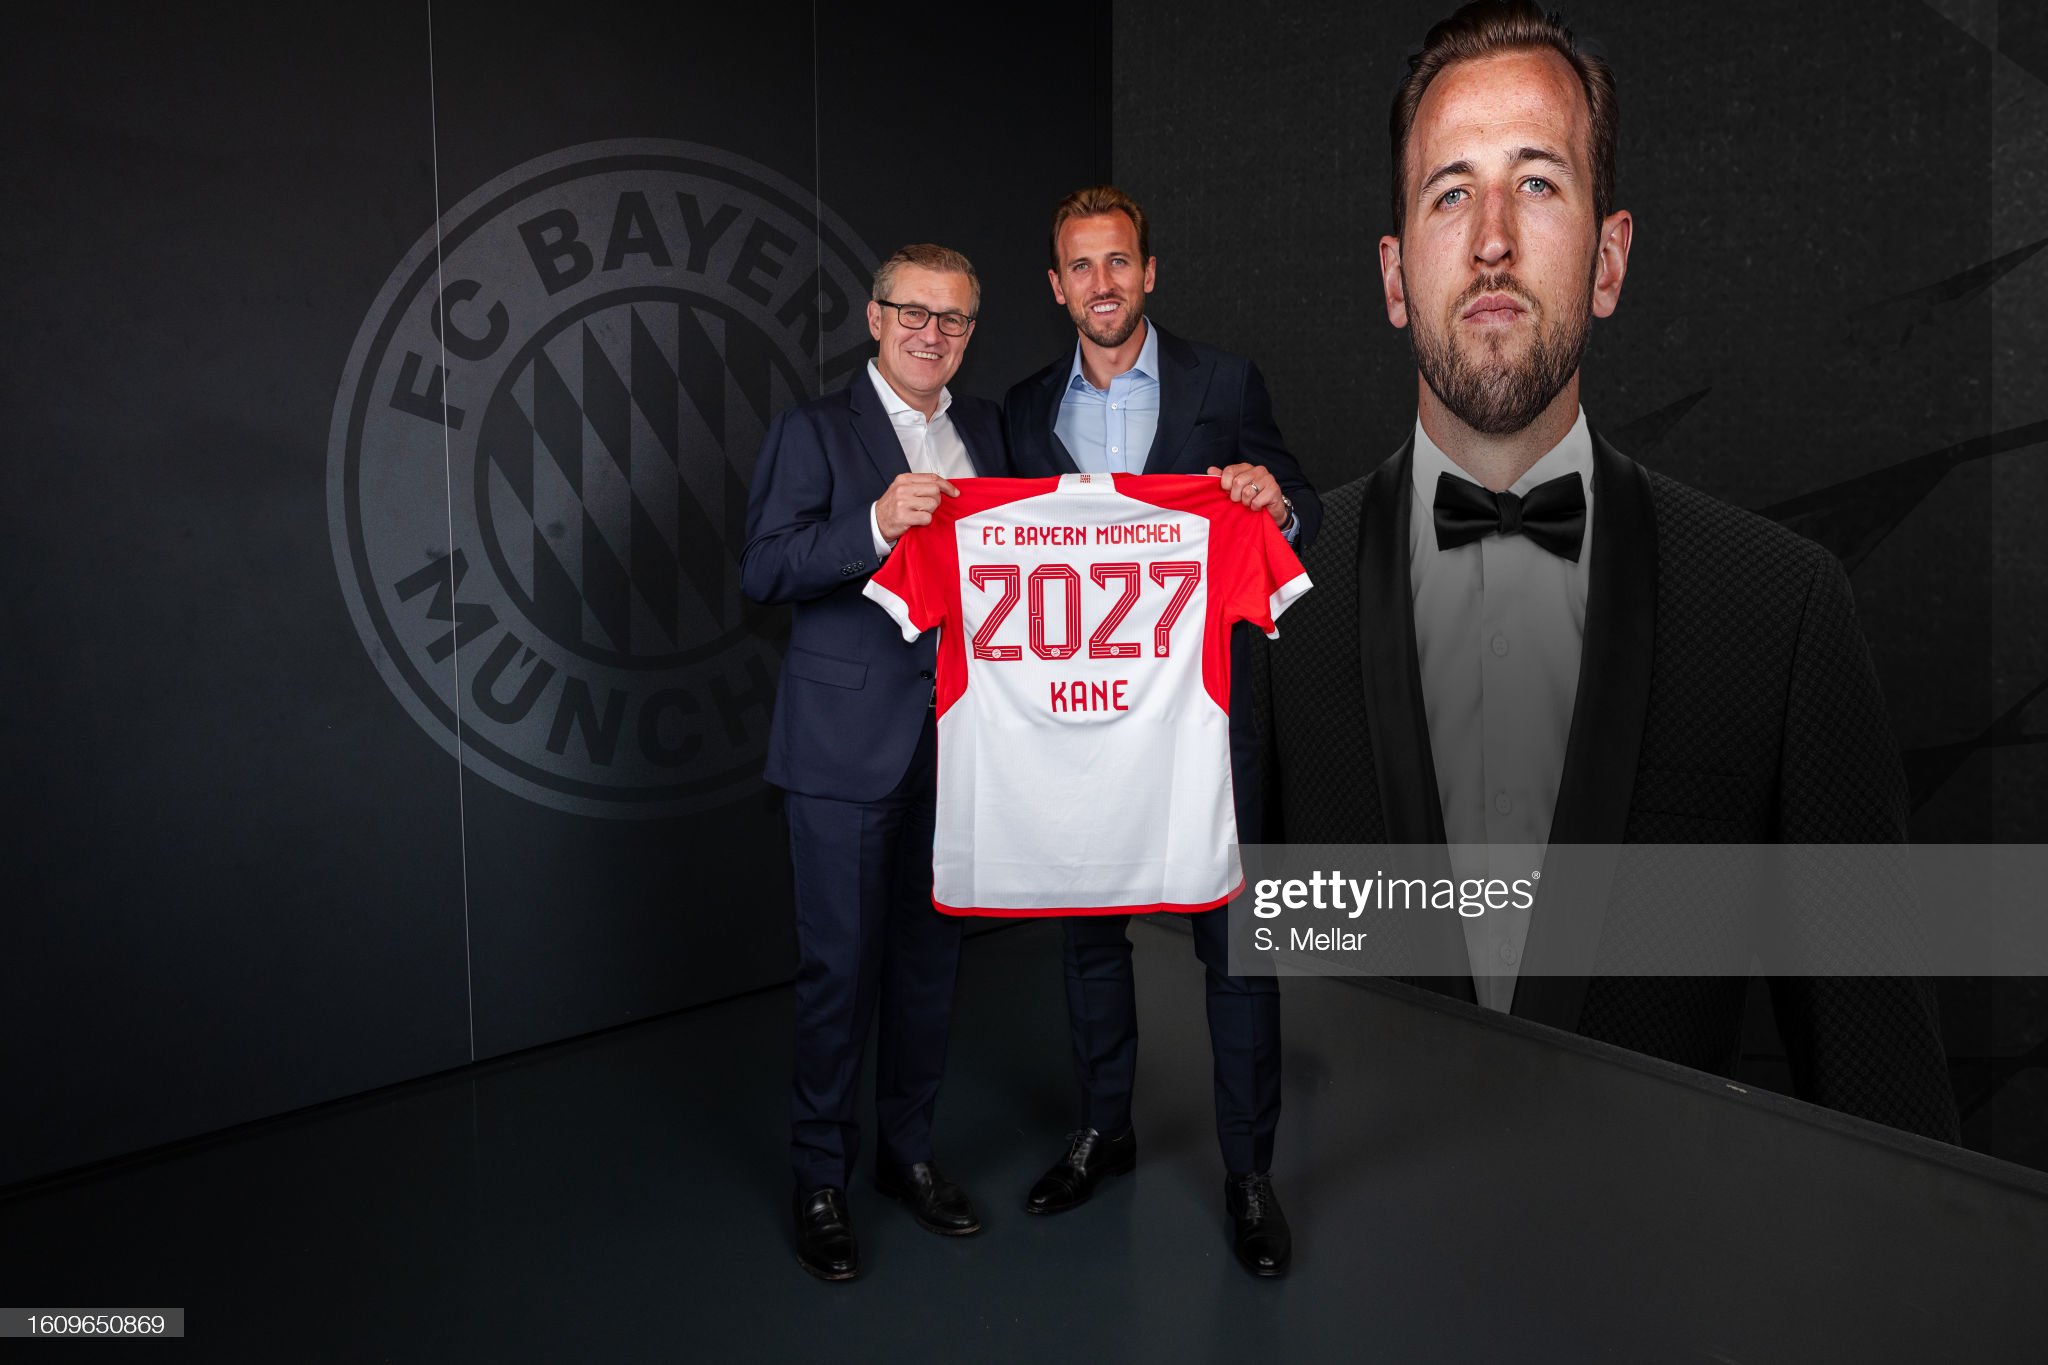 gettyimages-1609650869-2048x2048.jpg